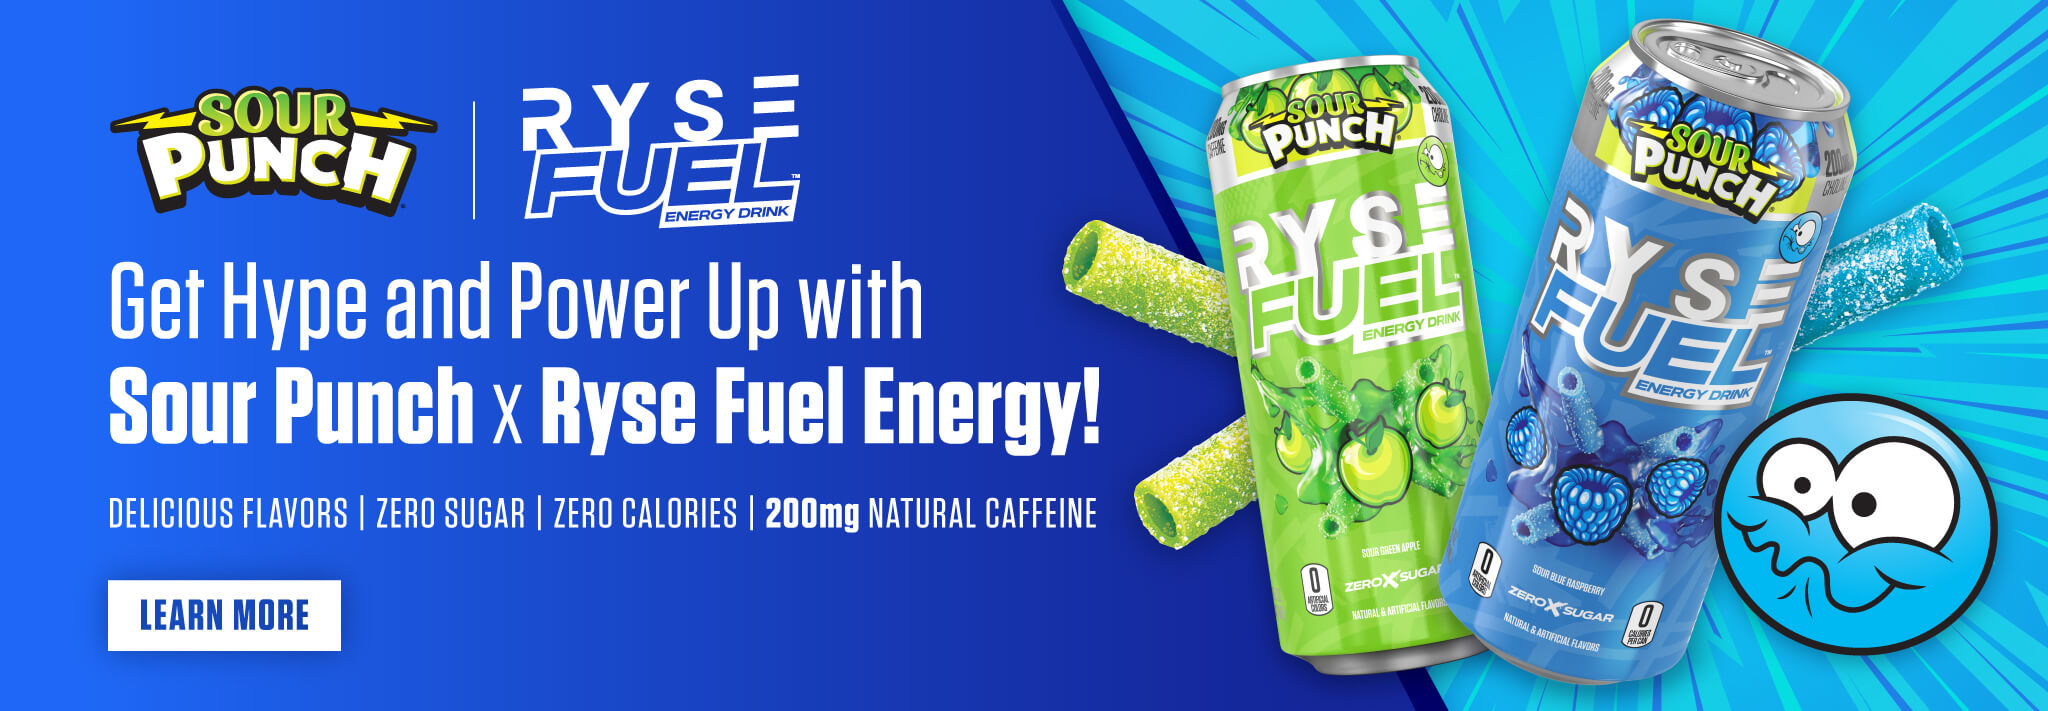 Get Hype and Power Up with Sour Punch and Ryse Fuel Energy Drinks! Delicious flavors, zero sugar, zero calories, 200mg natural caffeine. Learn More